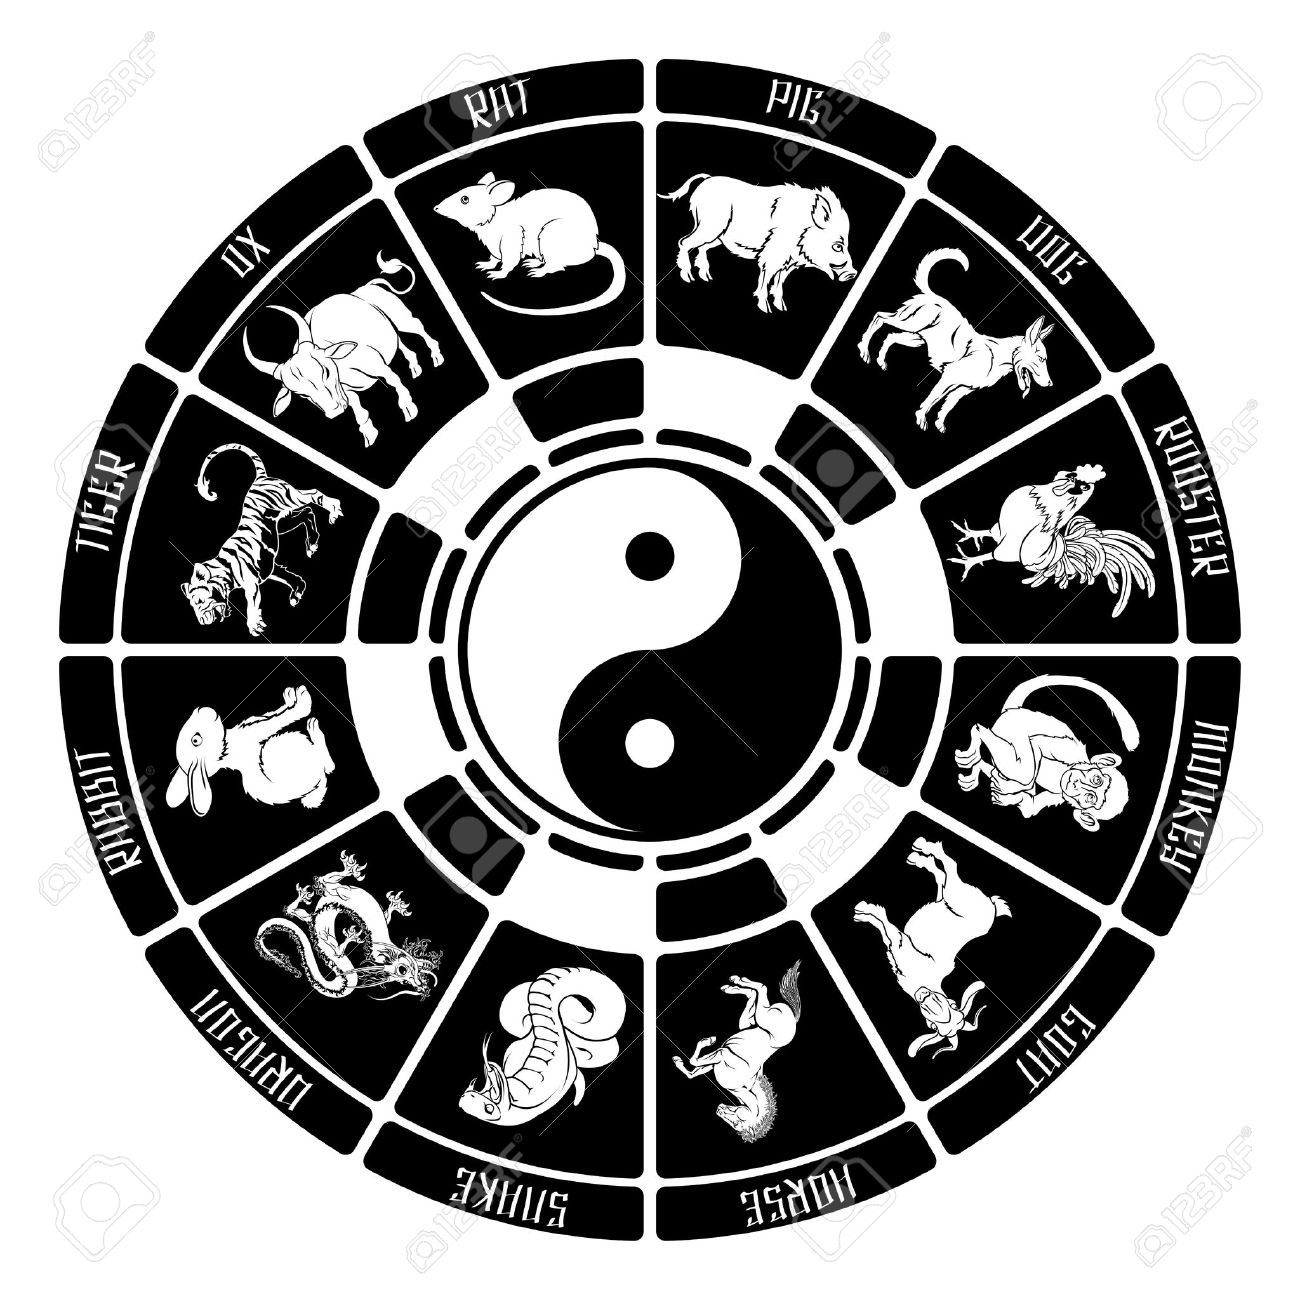 Black And White Illustration Of All The Animal Symbols In The..